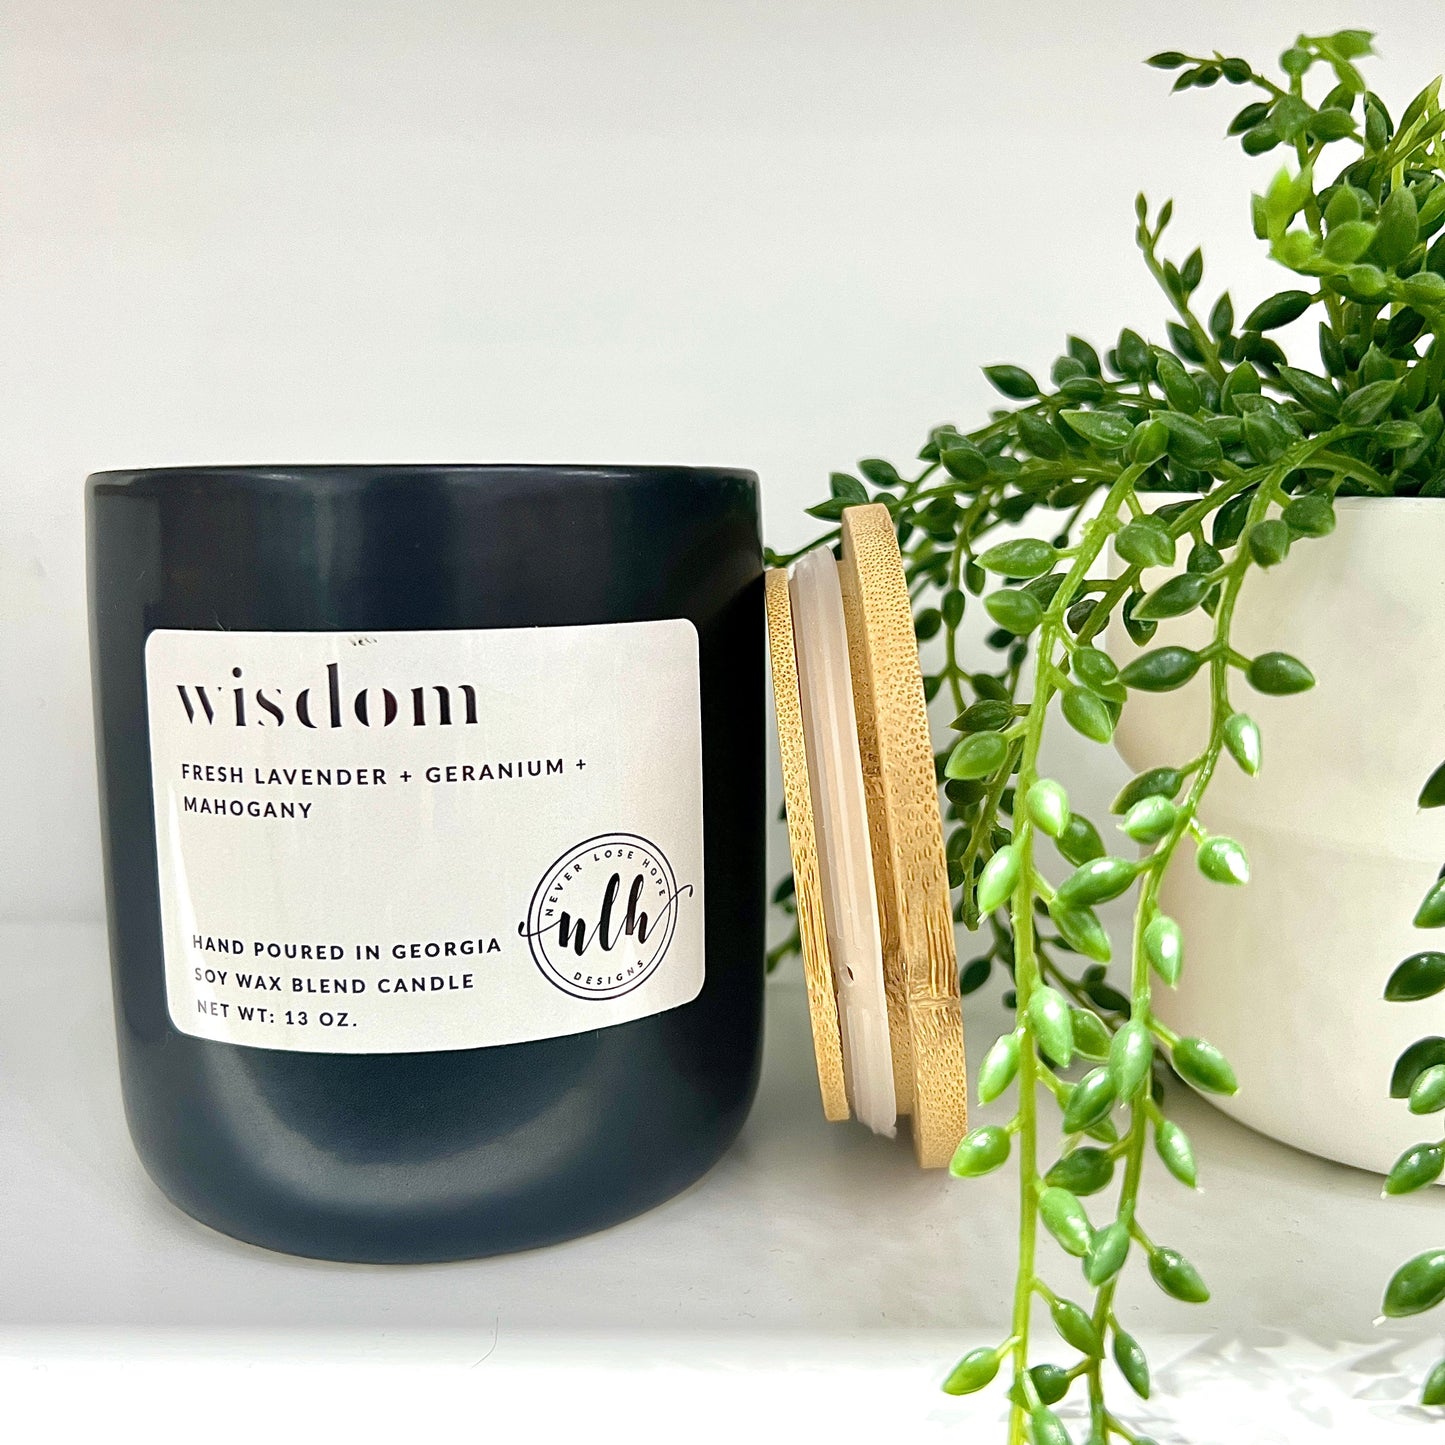 Never Lose Hope® Soy wax blend Candle- "Wisdom"